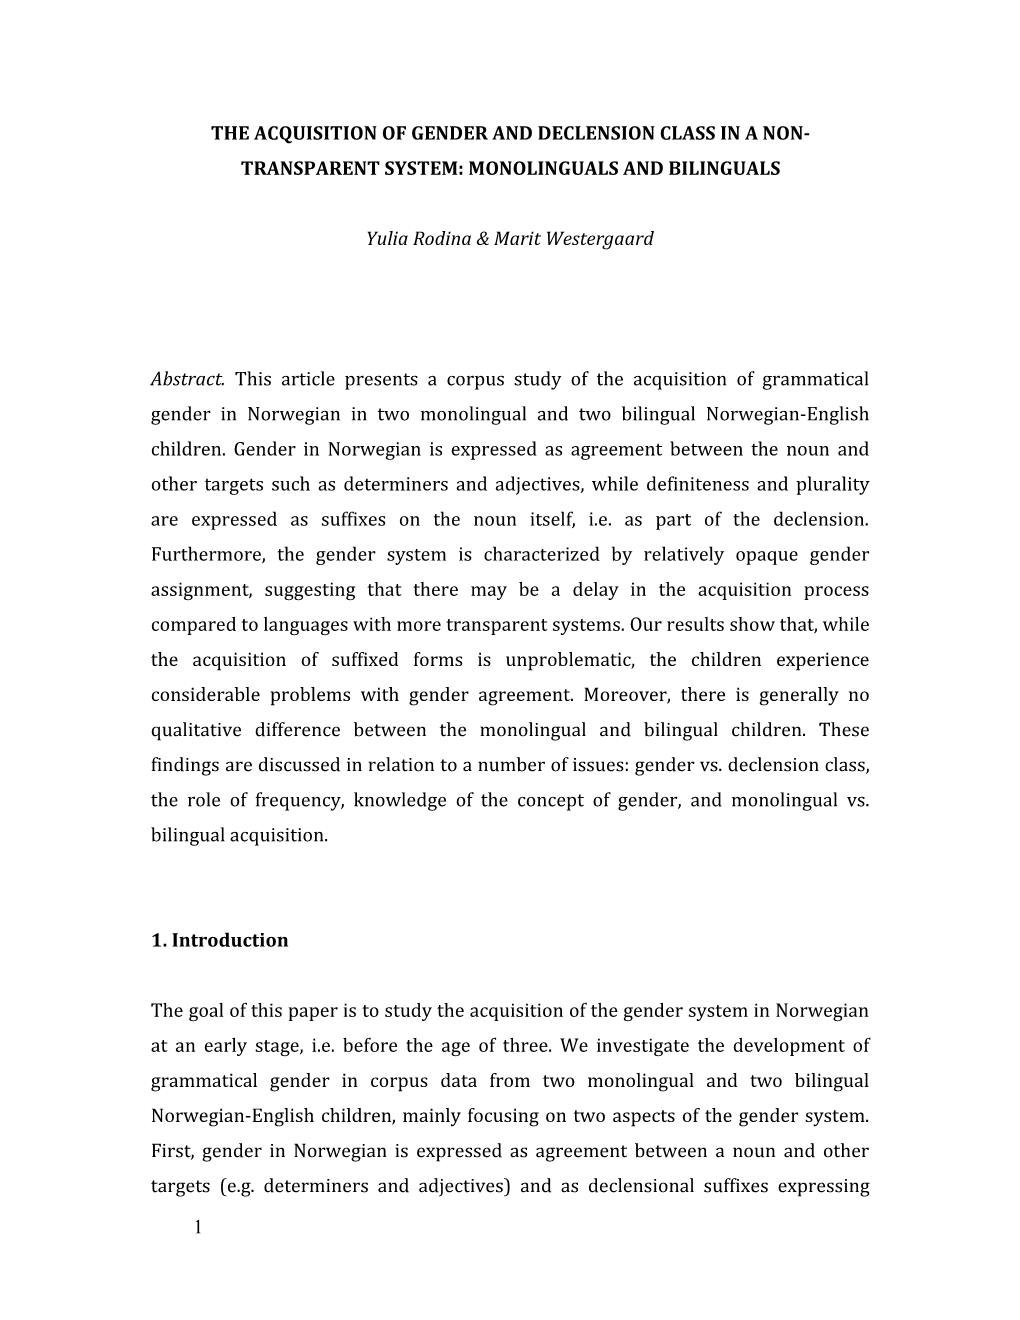 The Acquisition of Gender and Declension Class in a Non-Transparent System: Monolinguals